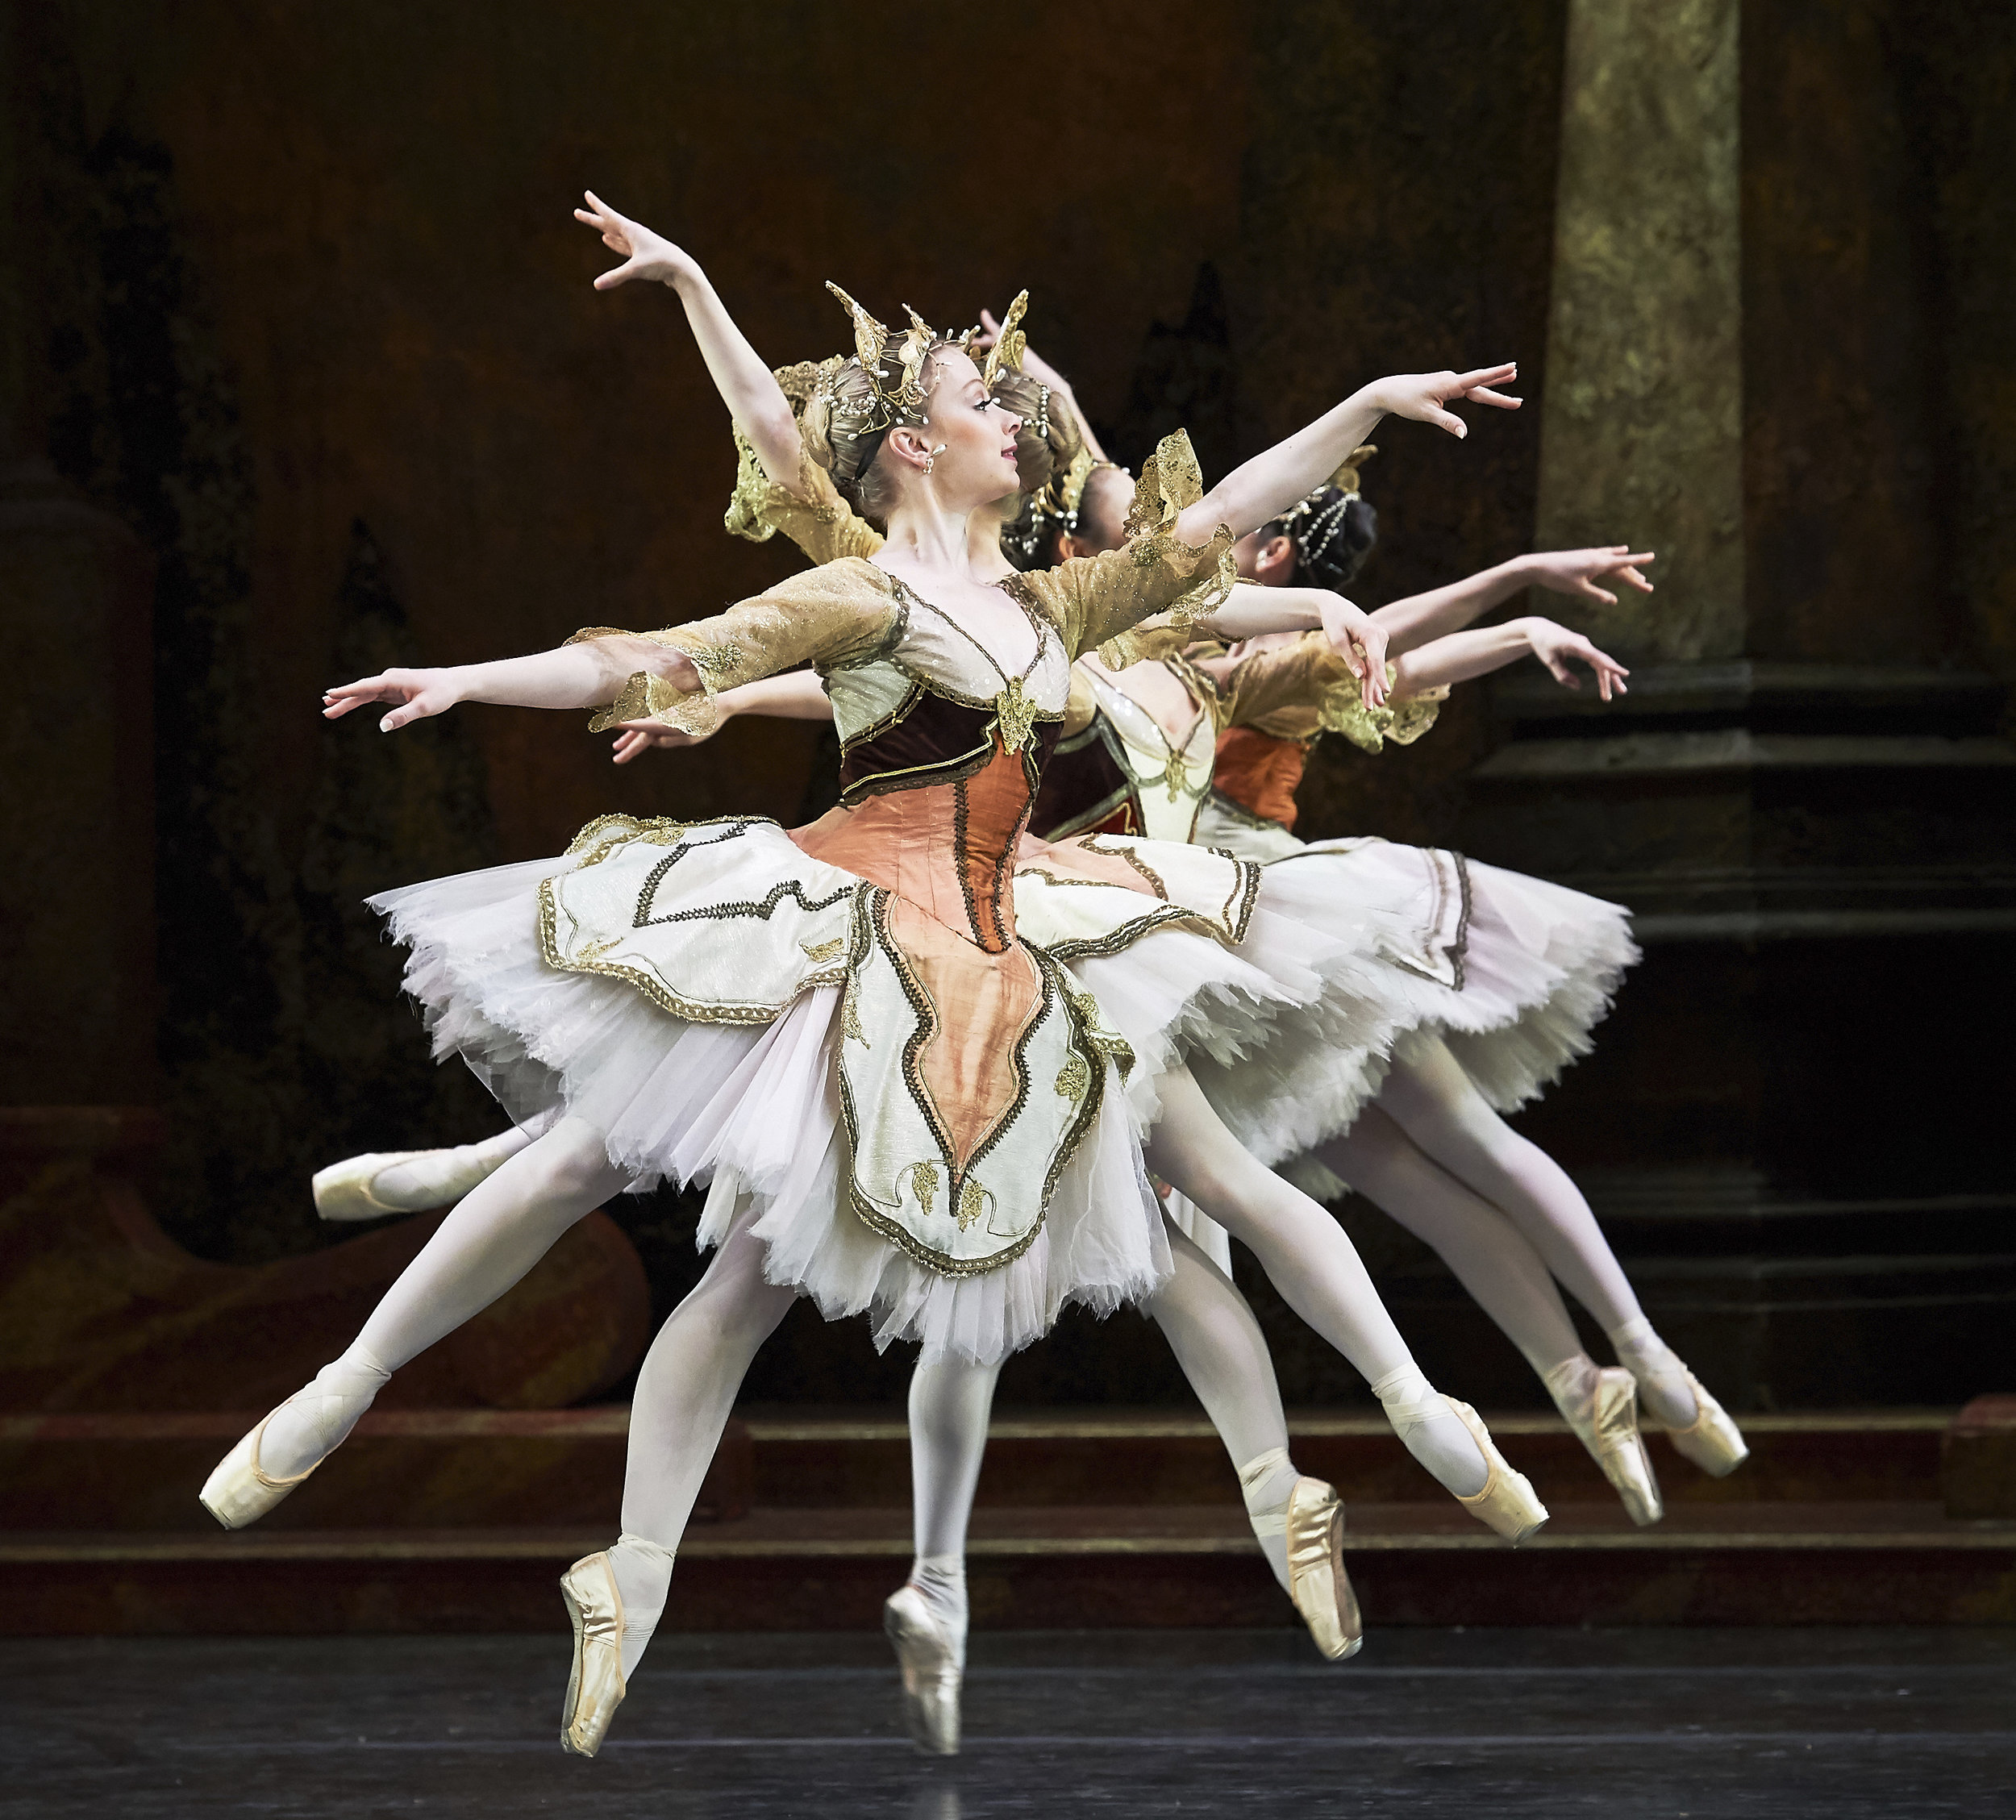  Dancers from the Birmingham Royal Ballet perform Sleeping Beauty at at the Mayflower Theatre, Southampton.  
Photo by Thomas Bowles, 30 January 2018
 